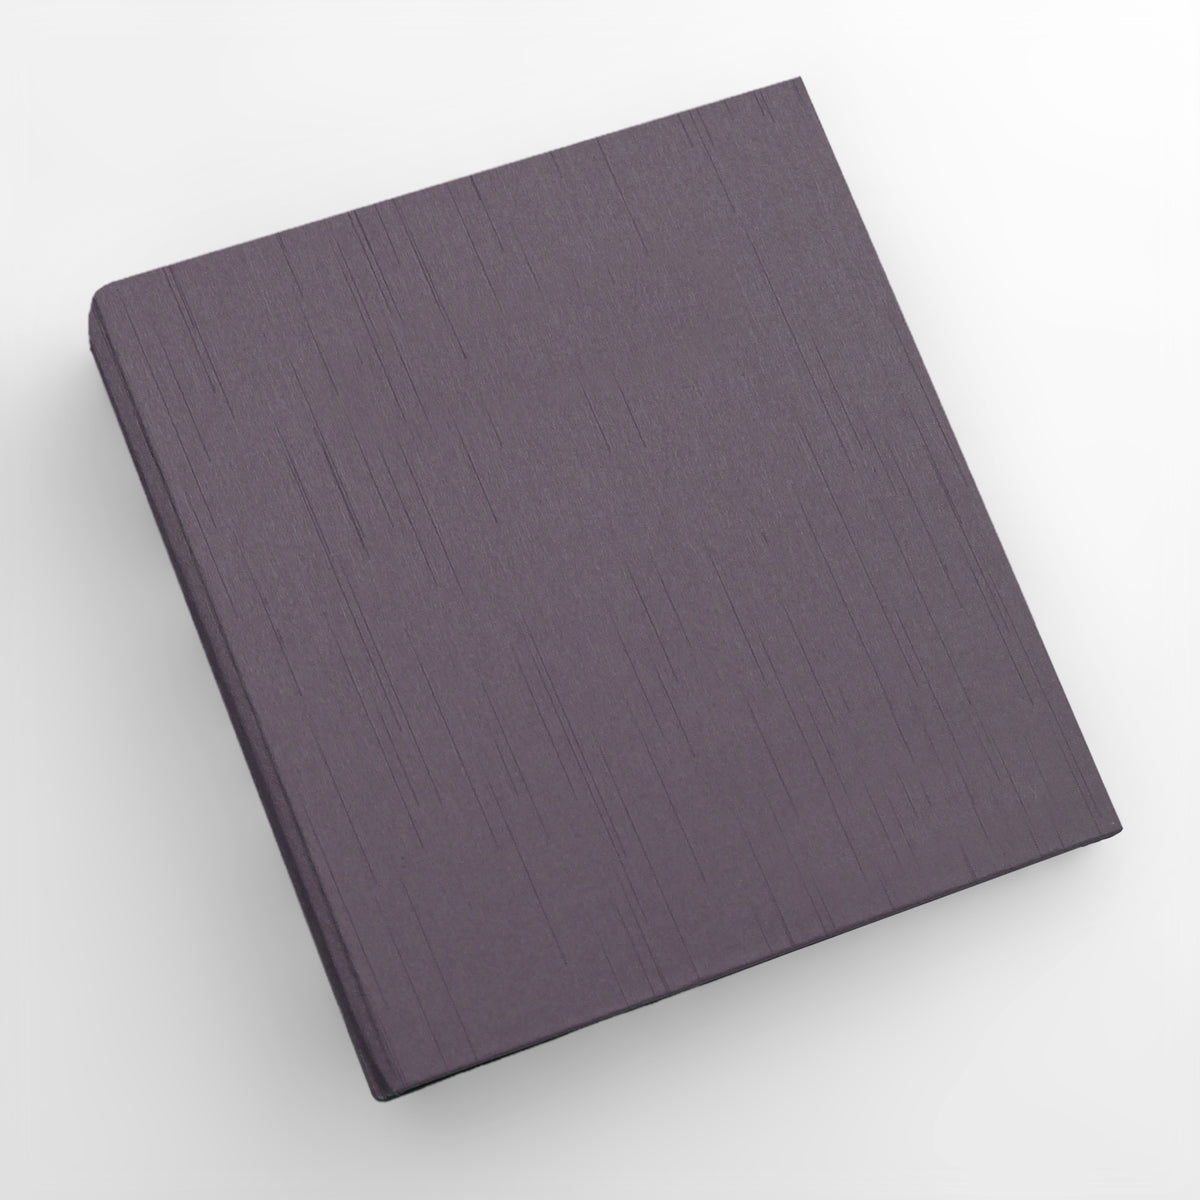 Storage Binder for Photos or Documents with Amethyst Silk Cover